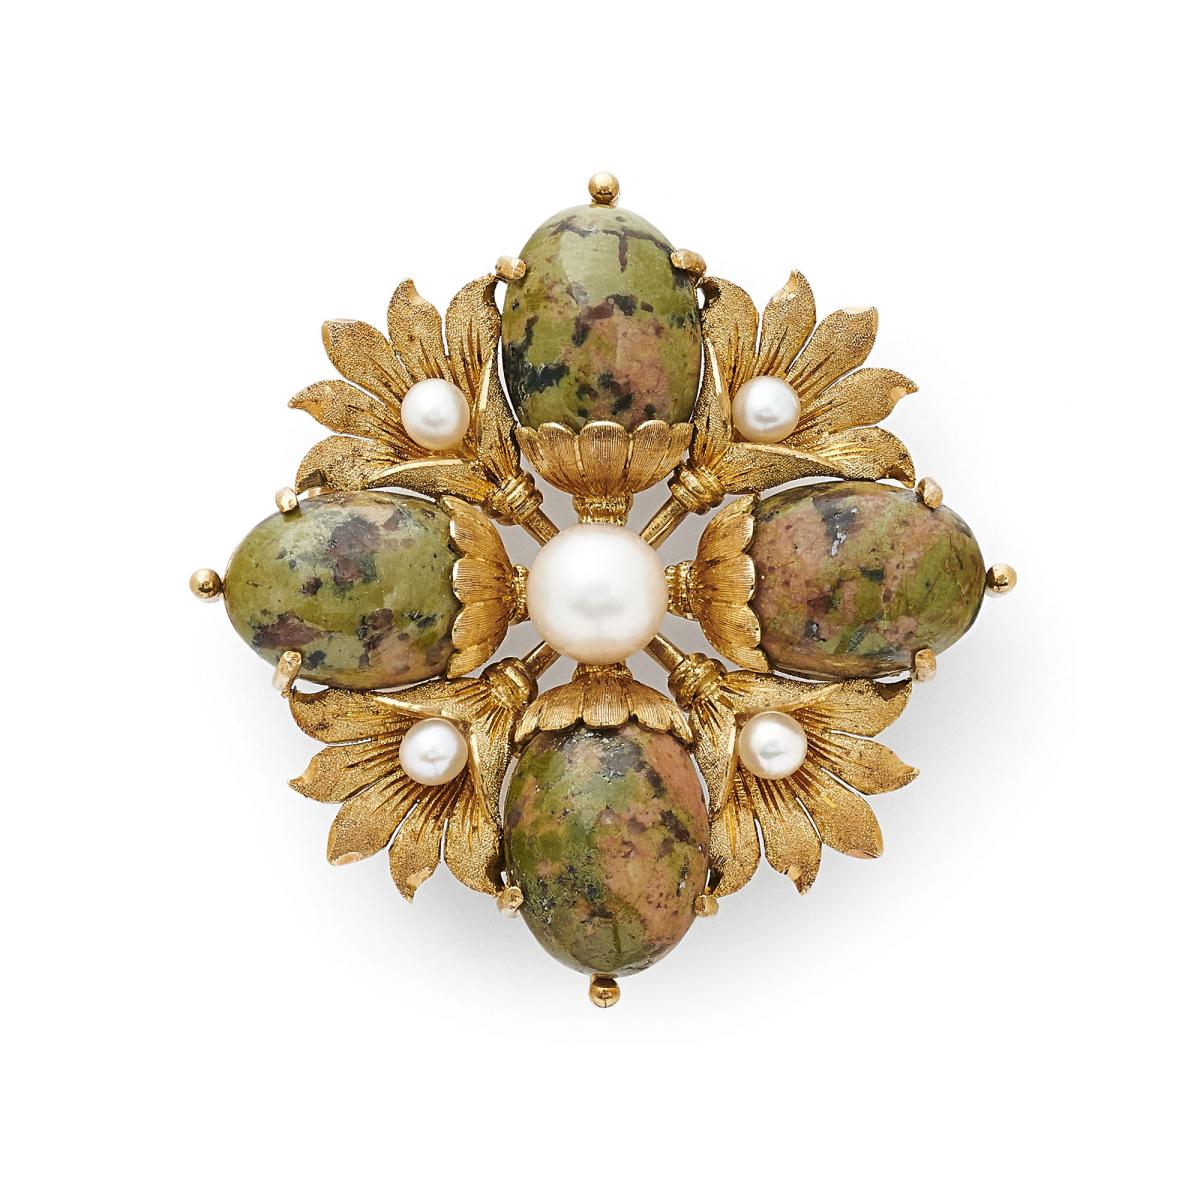 18ct yellow gold, pearl and serpentine agate quatrefoil brooch